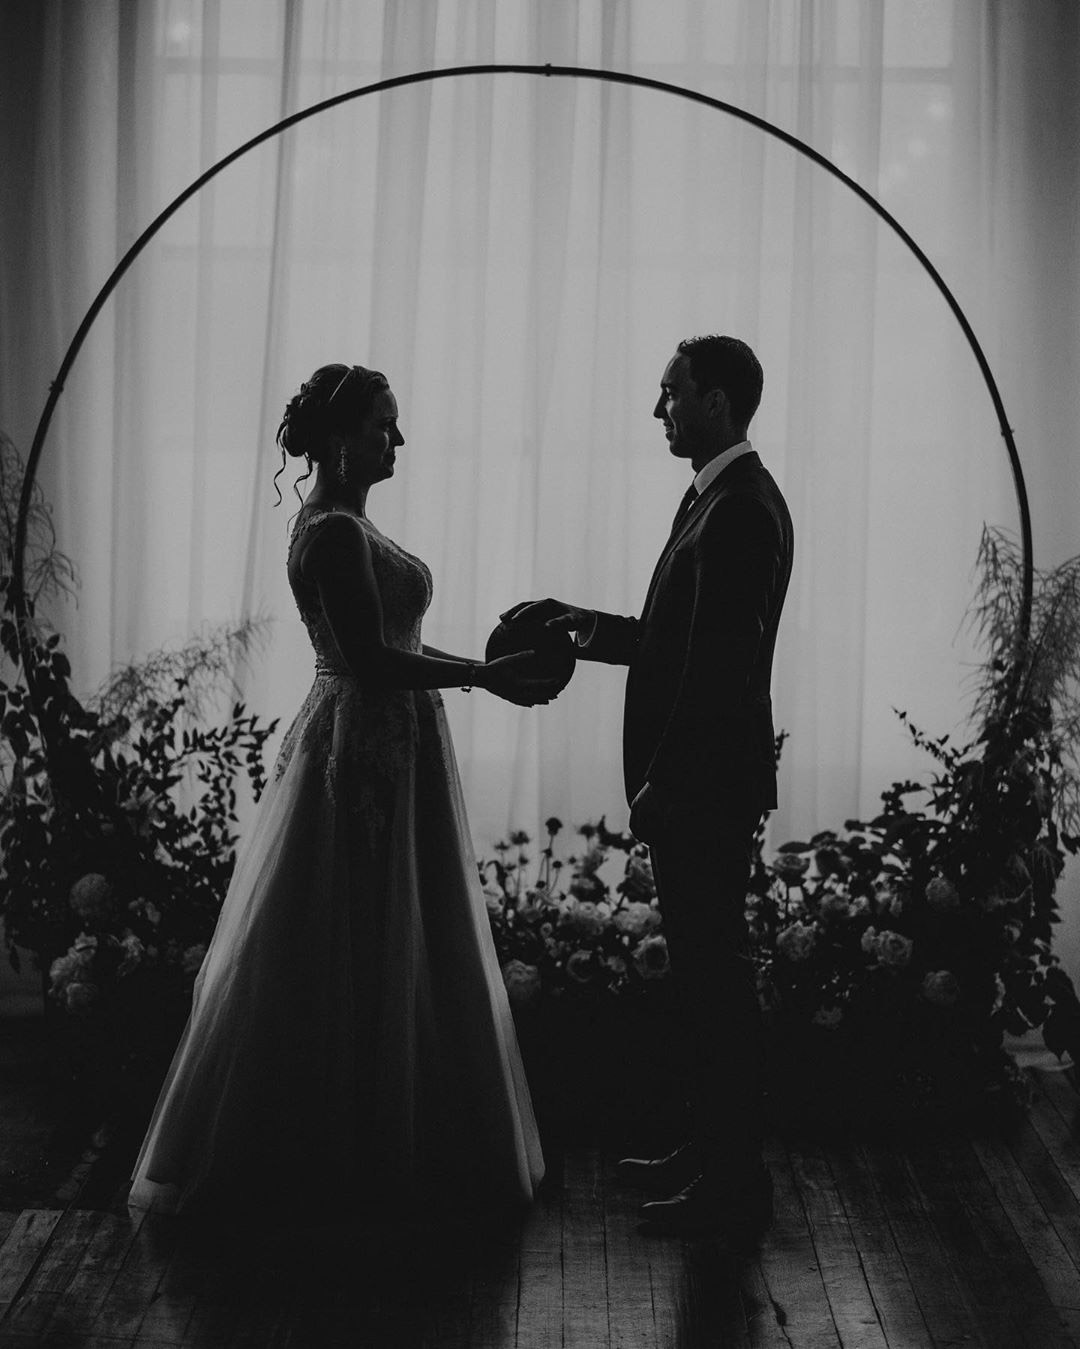 a silhouette of a wedding couple holding hands standing in front of the wedding arch